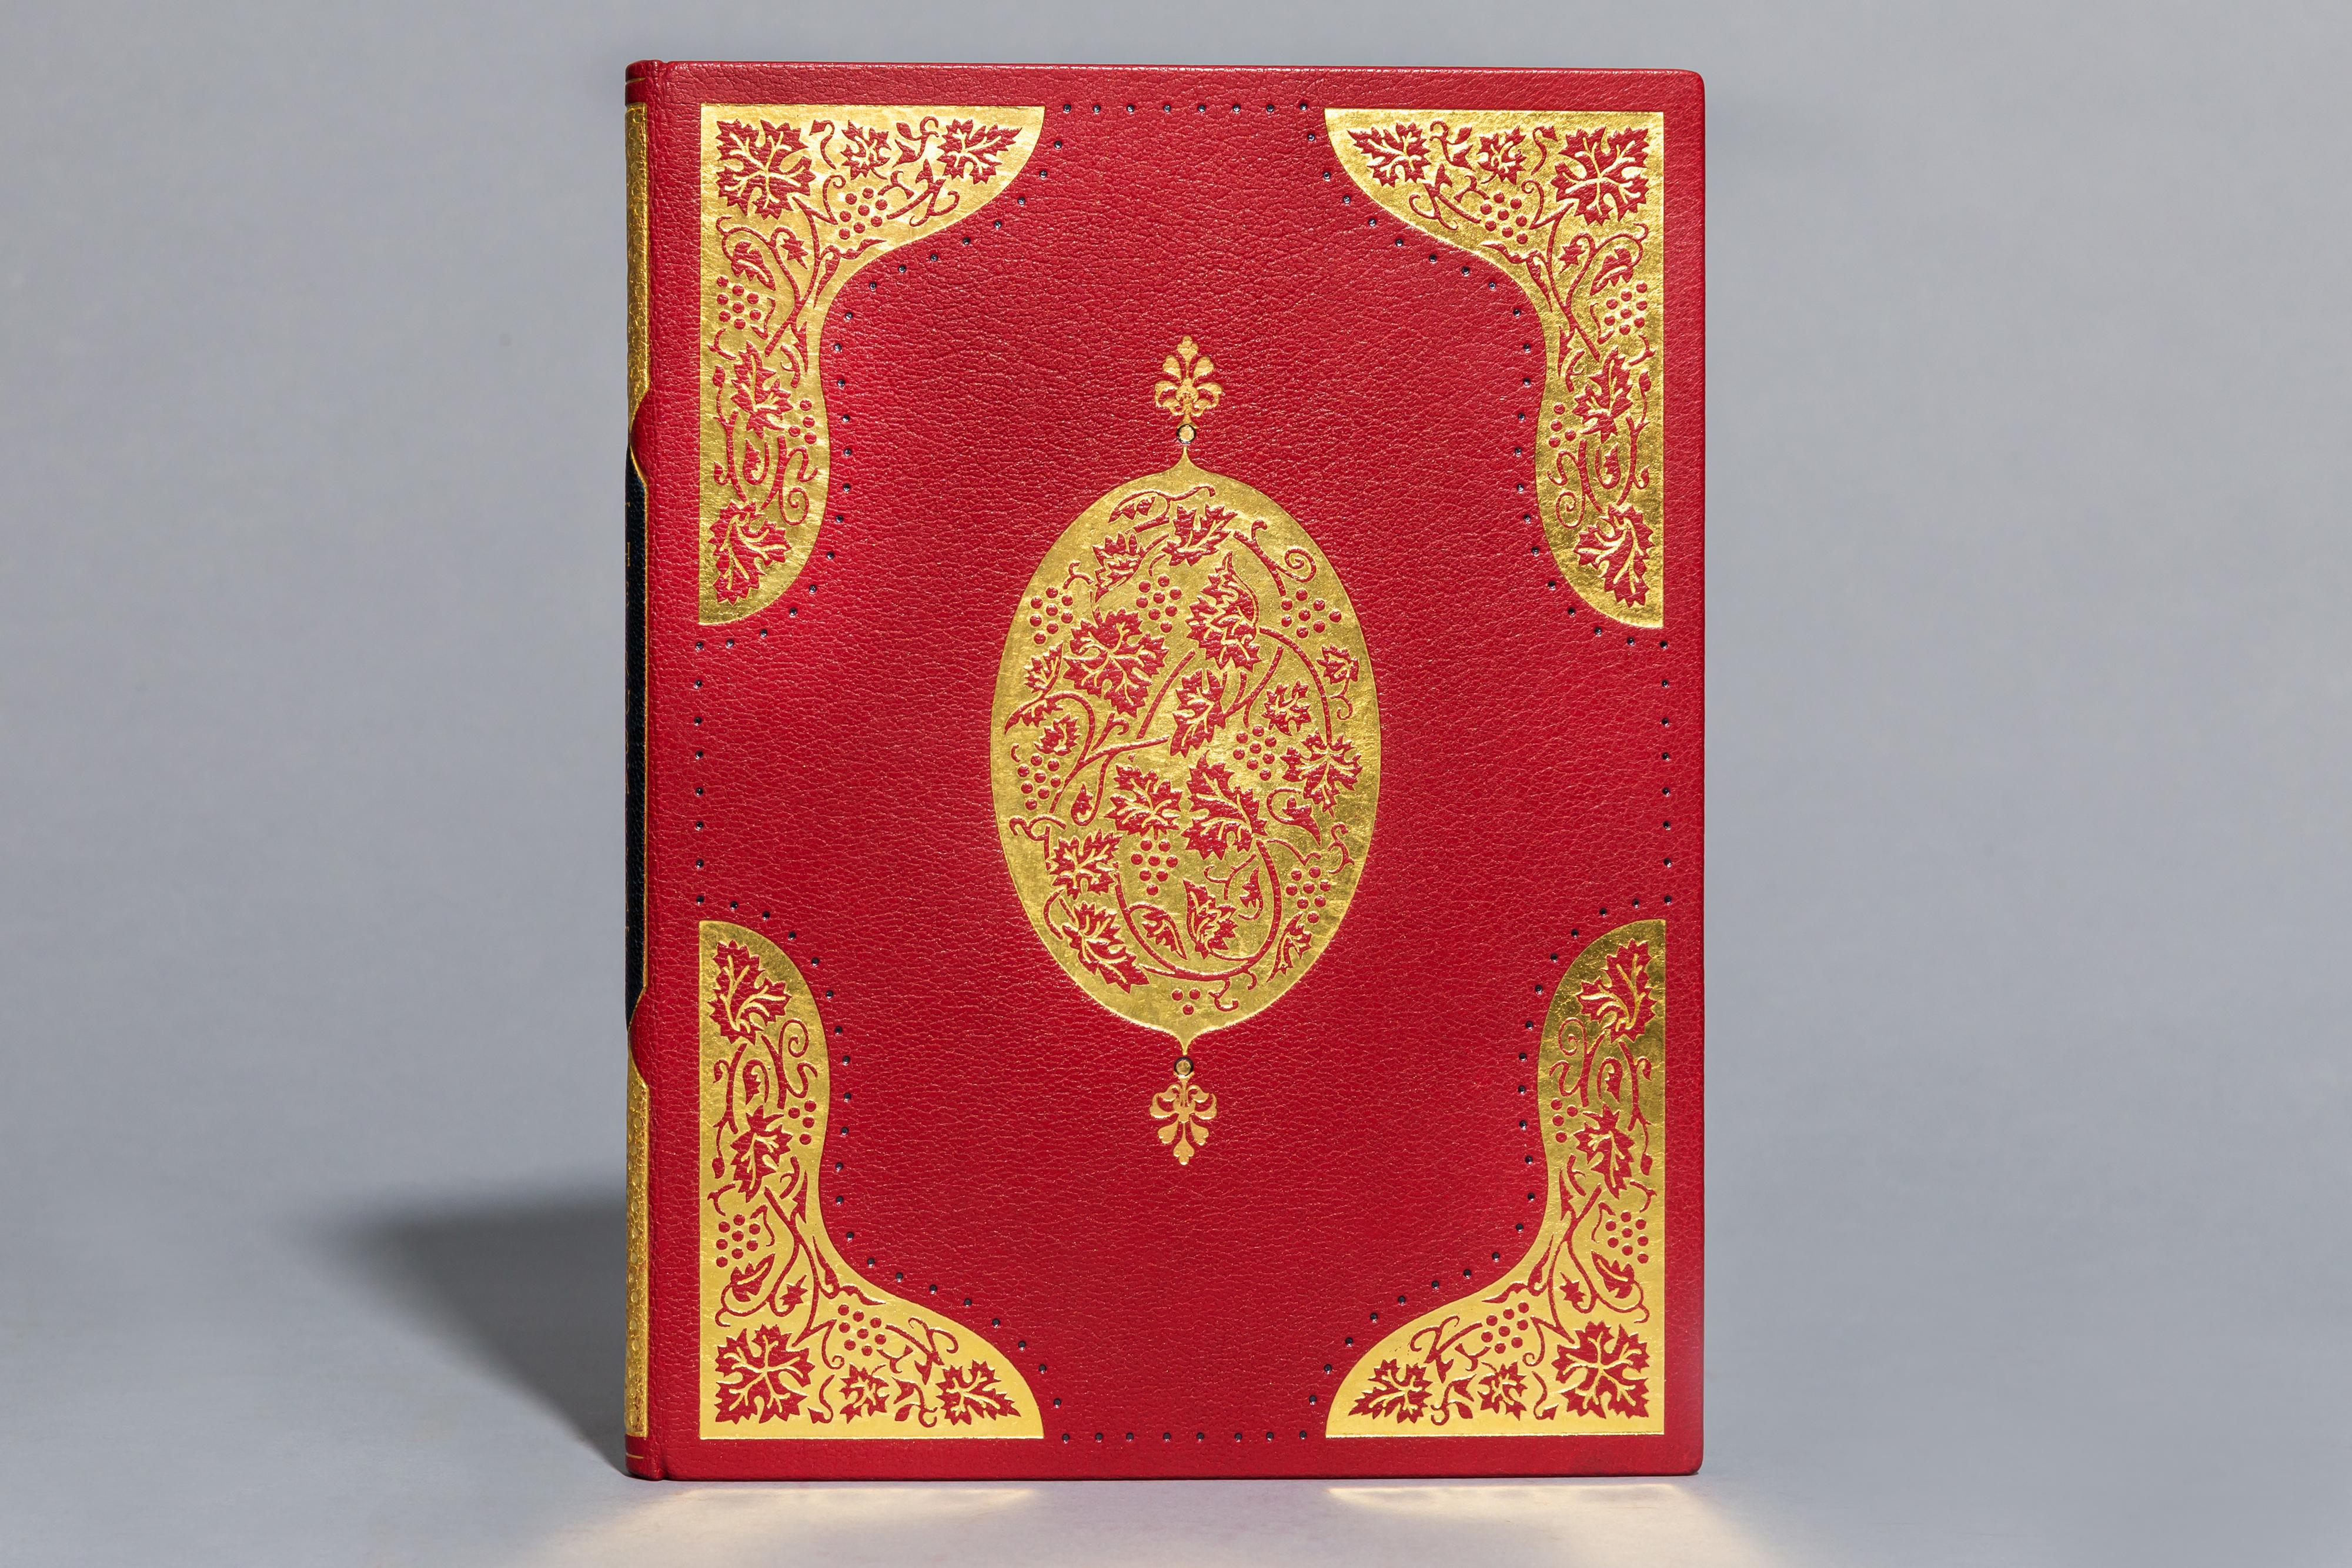 1 volume. 

Bound in full red Morocco with elaborate floral gilt on covers and spine, top edges gilt, limited to 88 copies on paper, this is #71. 

Published: London: Essex House Press, N.D. circa 1930s. 

Beautiful copy.